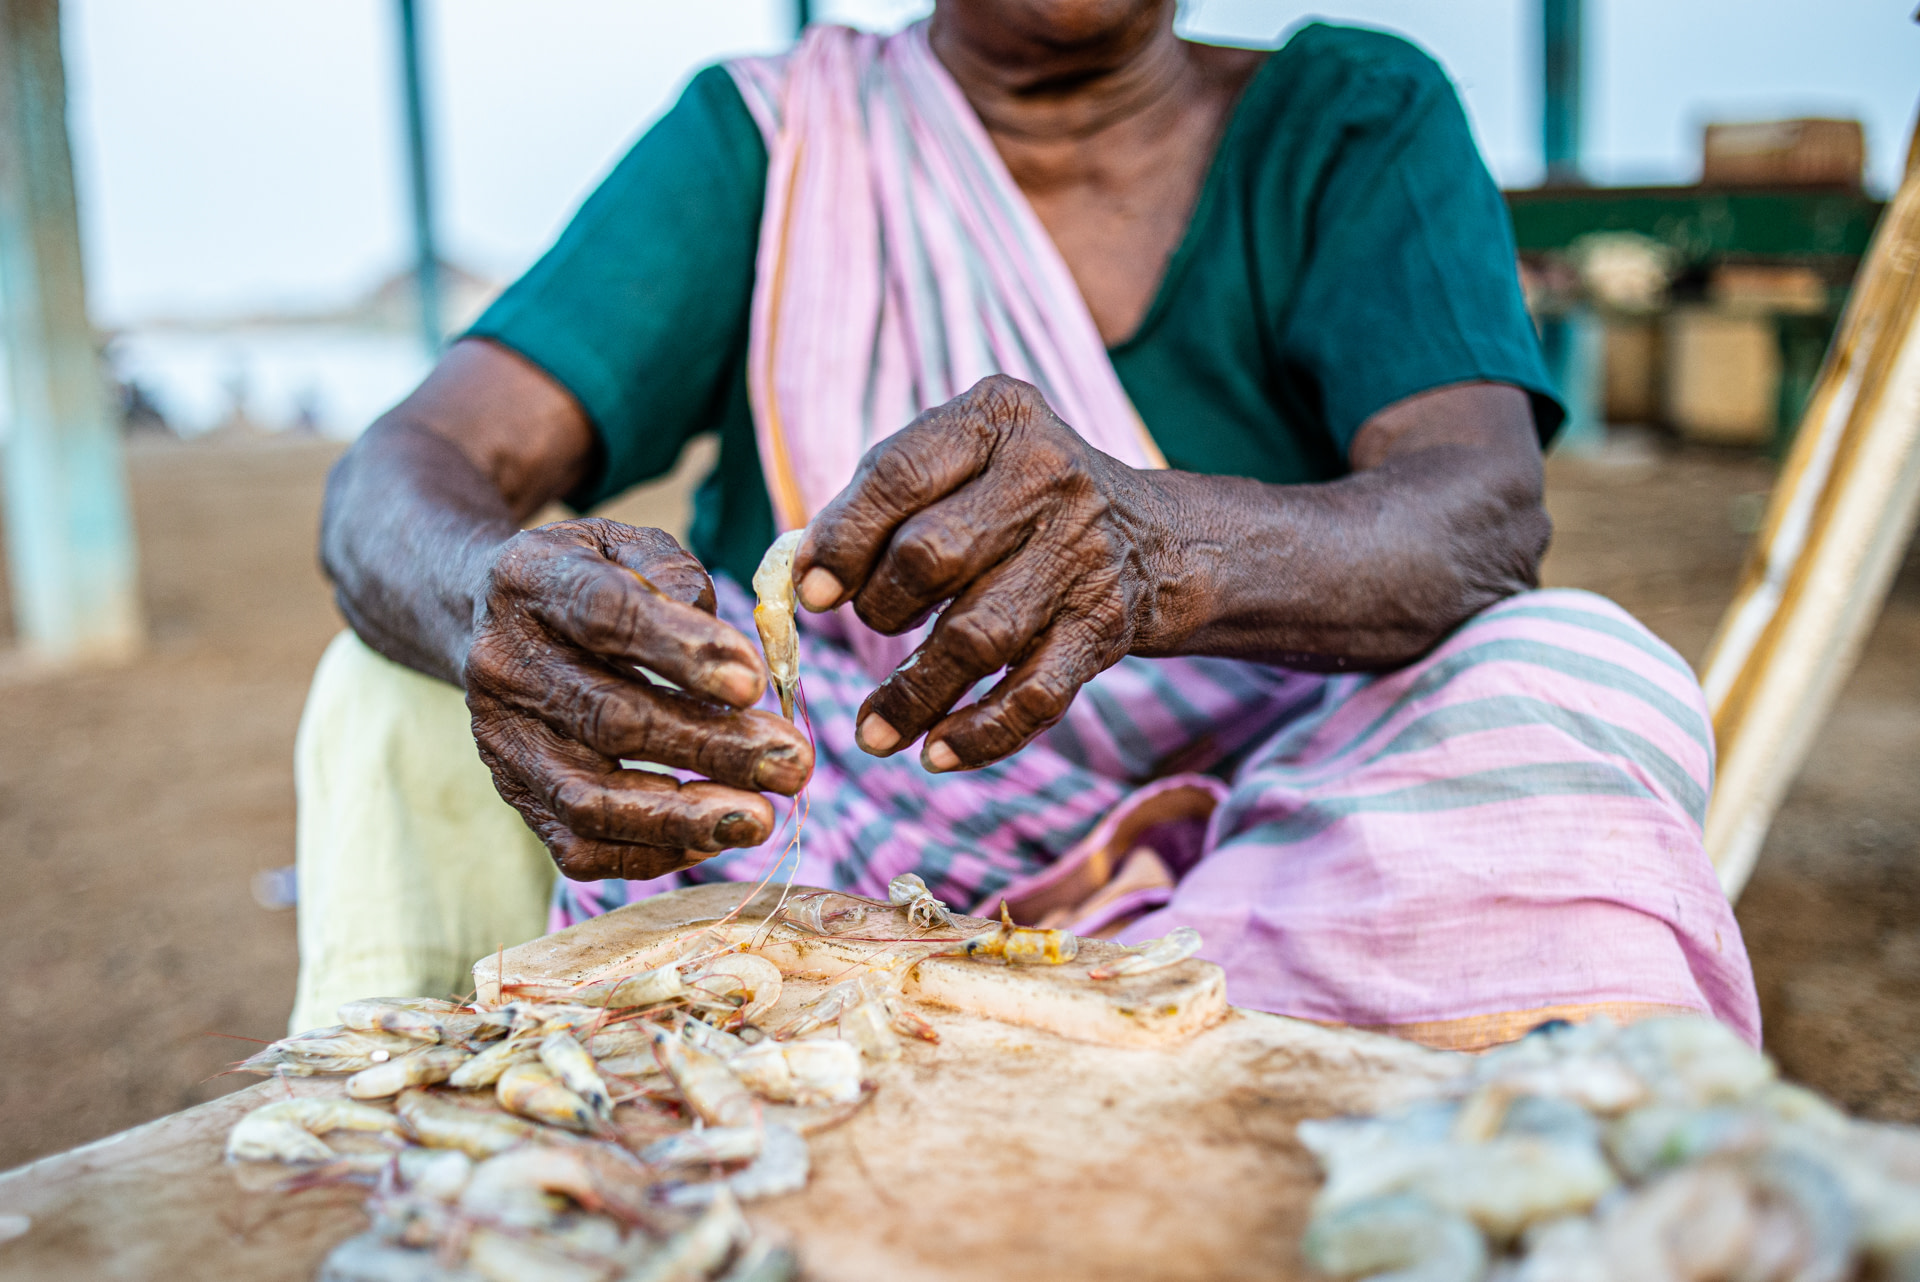 A local female fishmonger deveins shrimps and prawns who were recovered from fishing bycatch. Kothapalli, Andhra Pradesh, India, 2022. S. Chakrabarti / We Animals Media